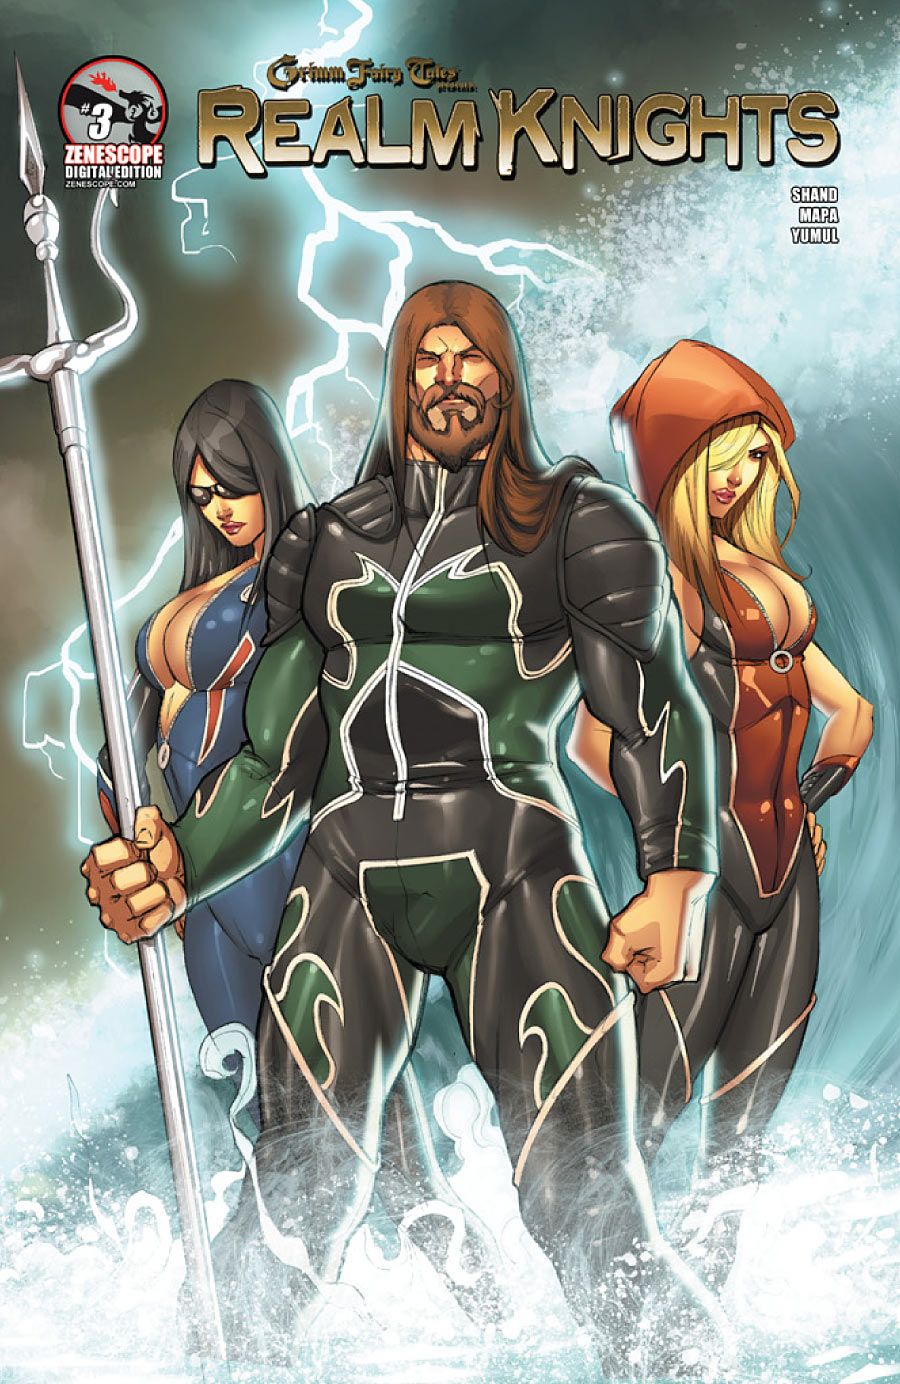 Grimm Fairy Tales Presents: Realm Knights #3 Comic